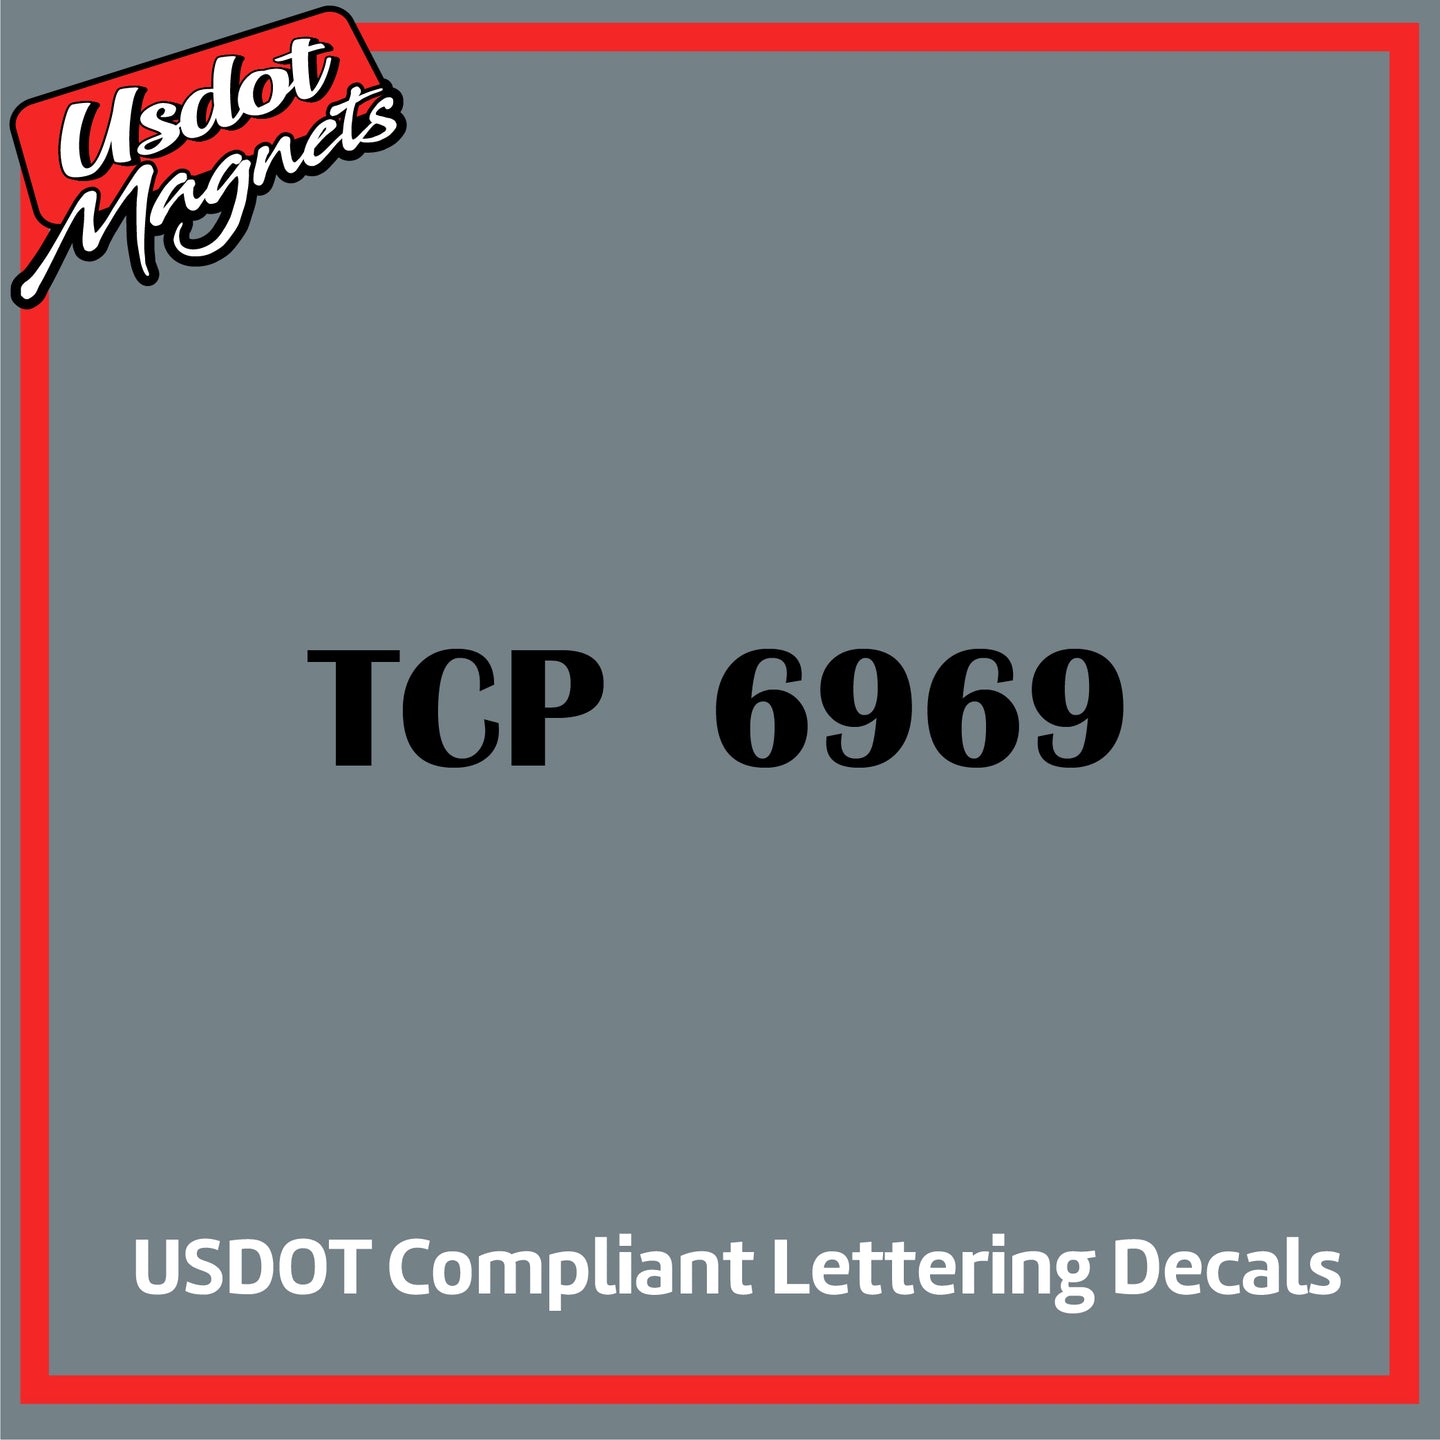 TCP Number Sticker Decal Lettering (Set of 2)